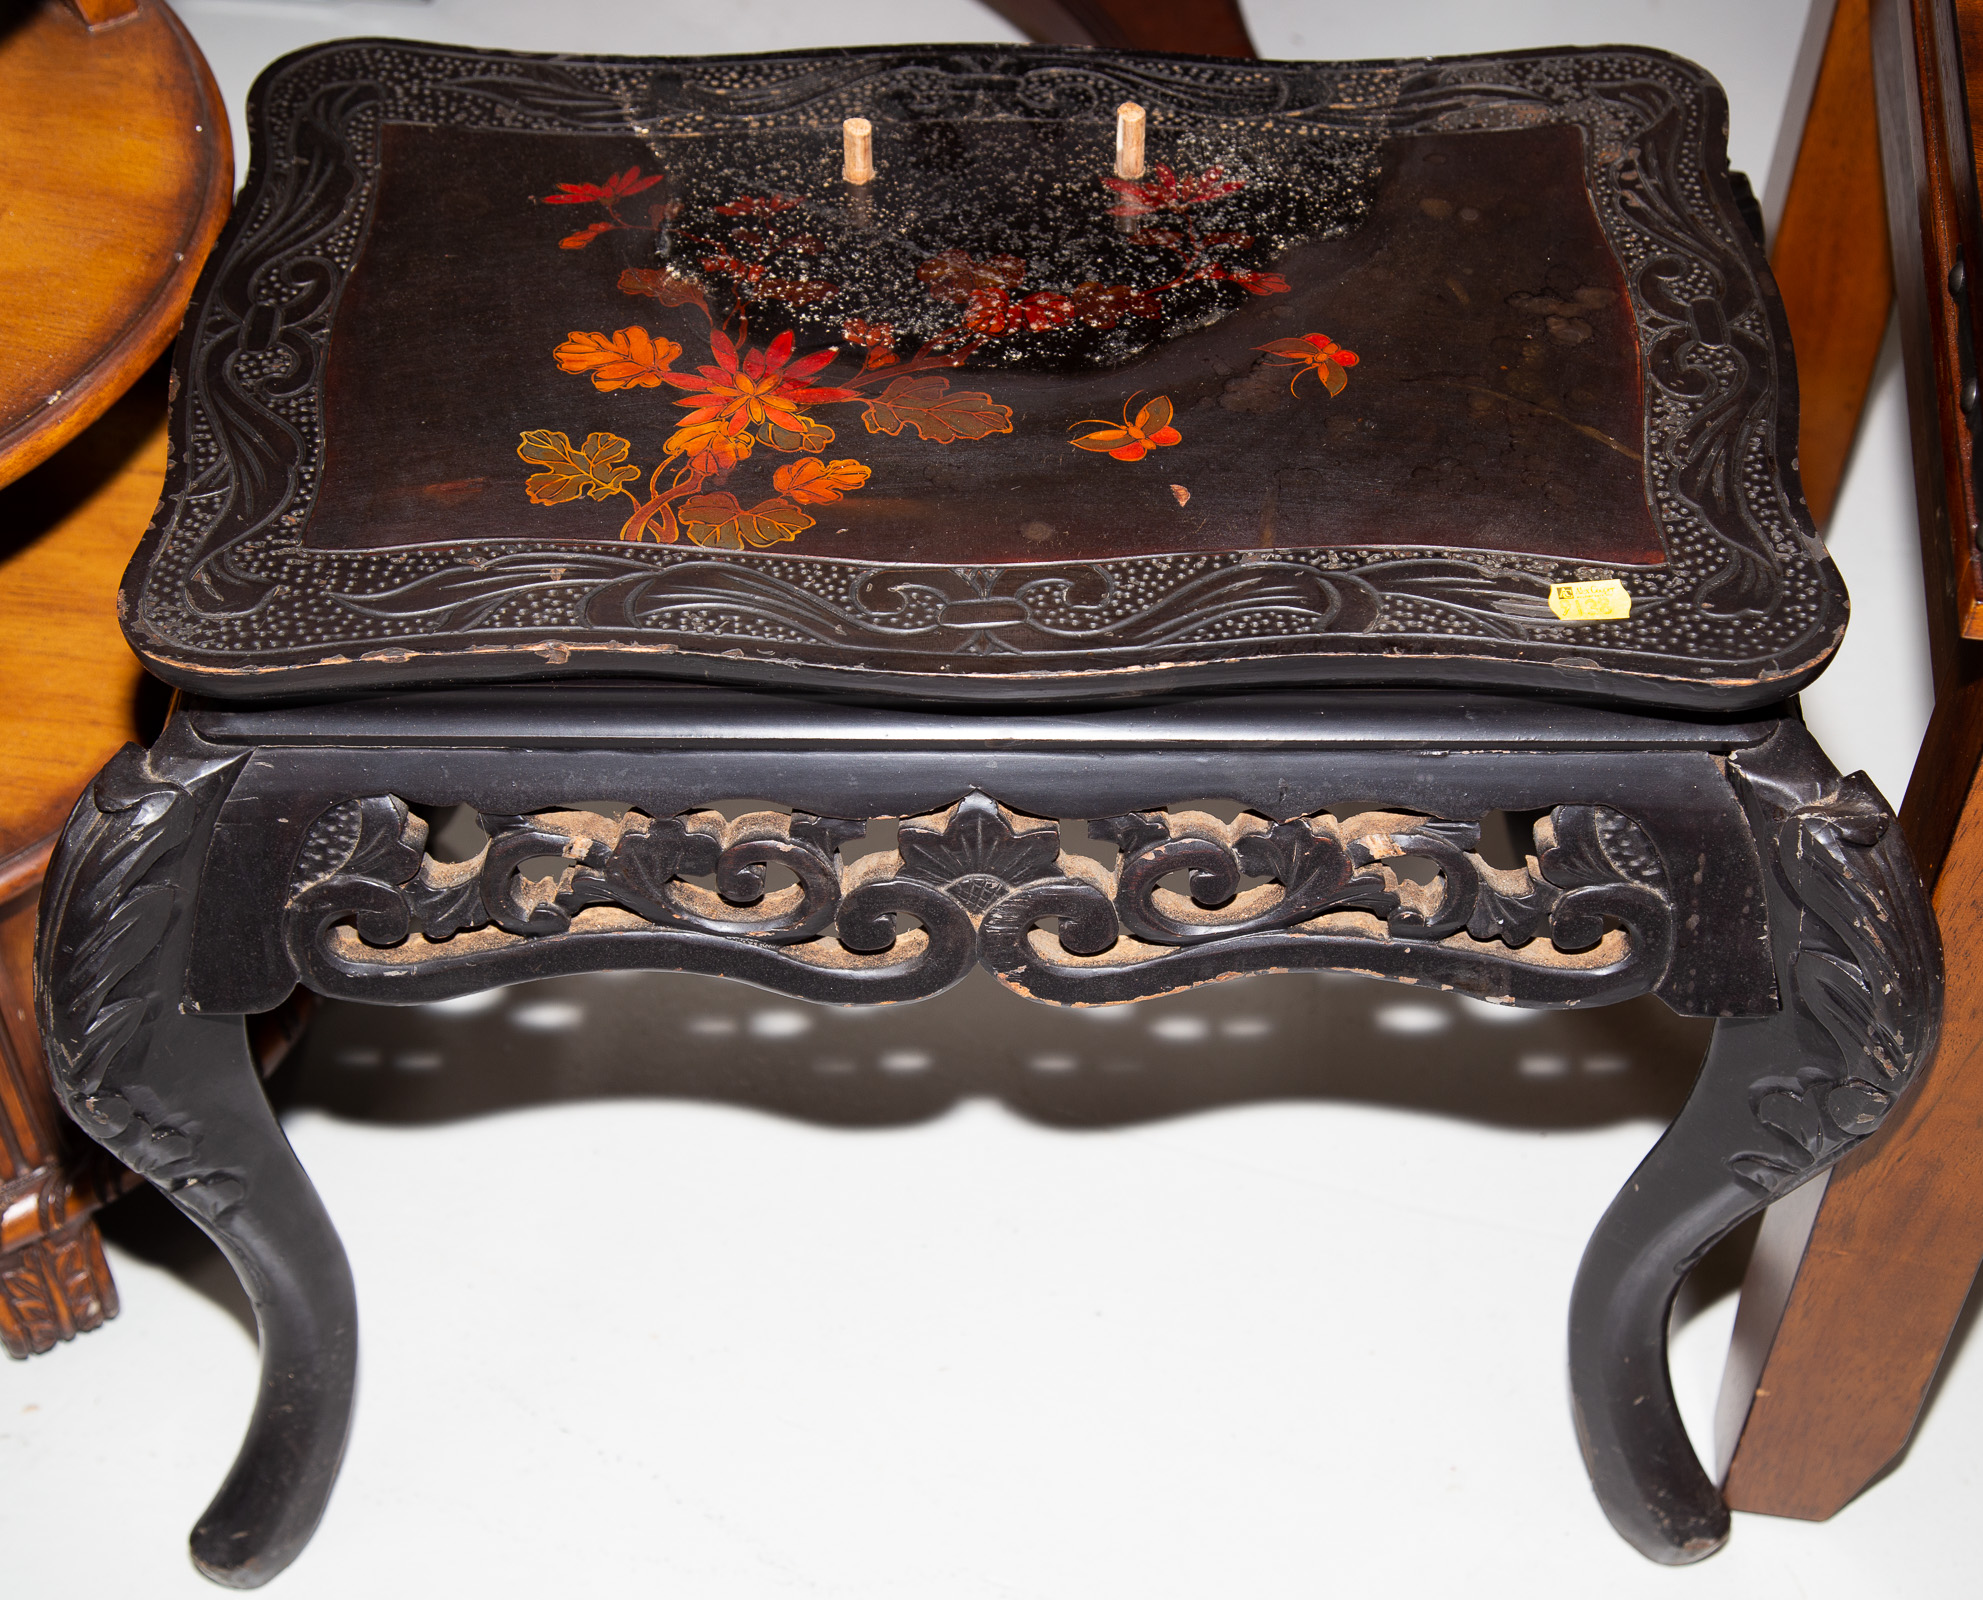 A CHINESE EXPORT LACQUER TABLE